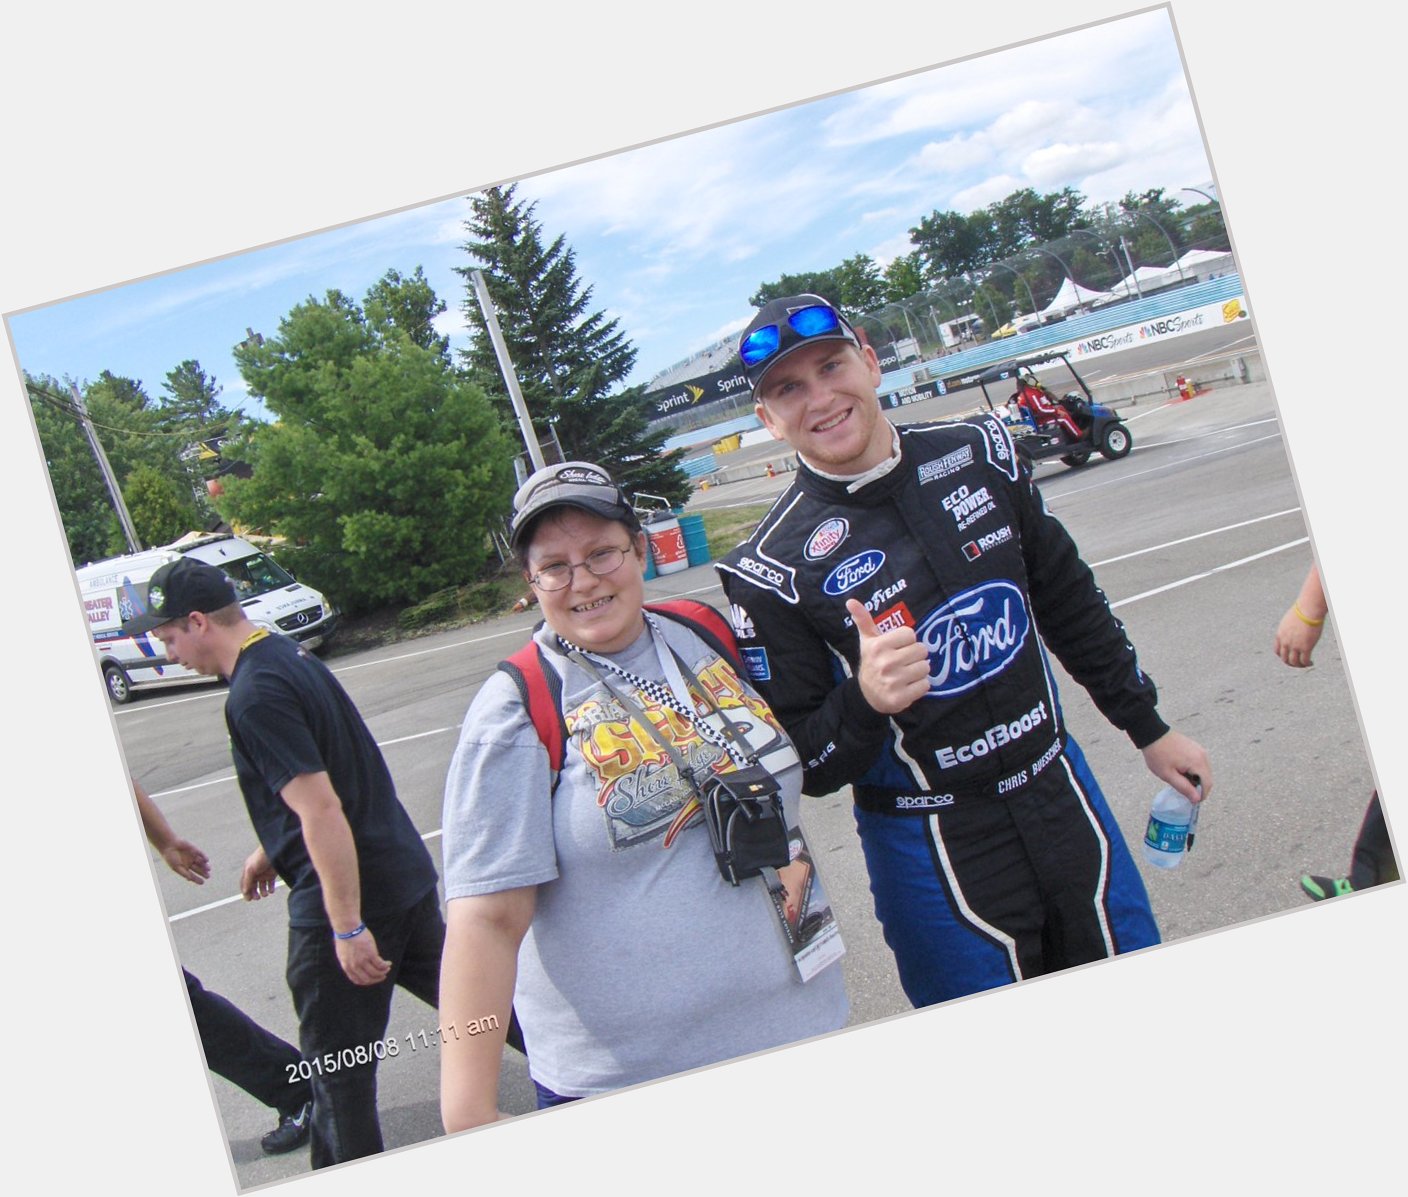  Happy belated Birthday and good luck. You are so nice, glad to have met you at Watkins Glen. 